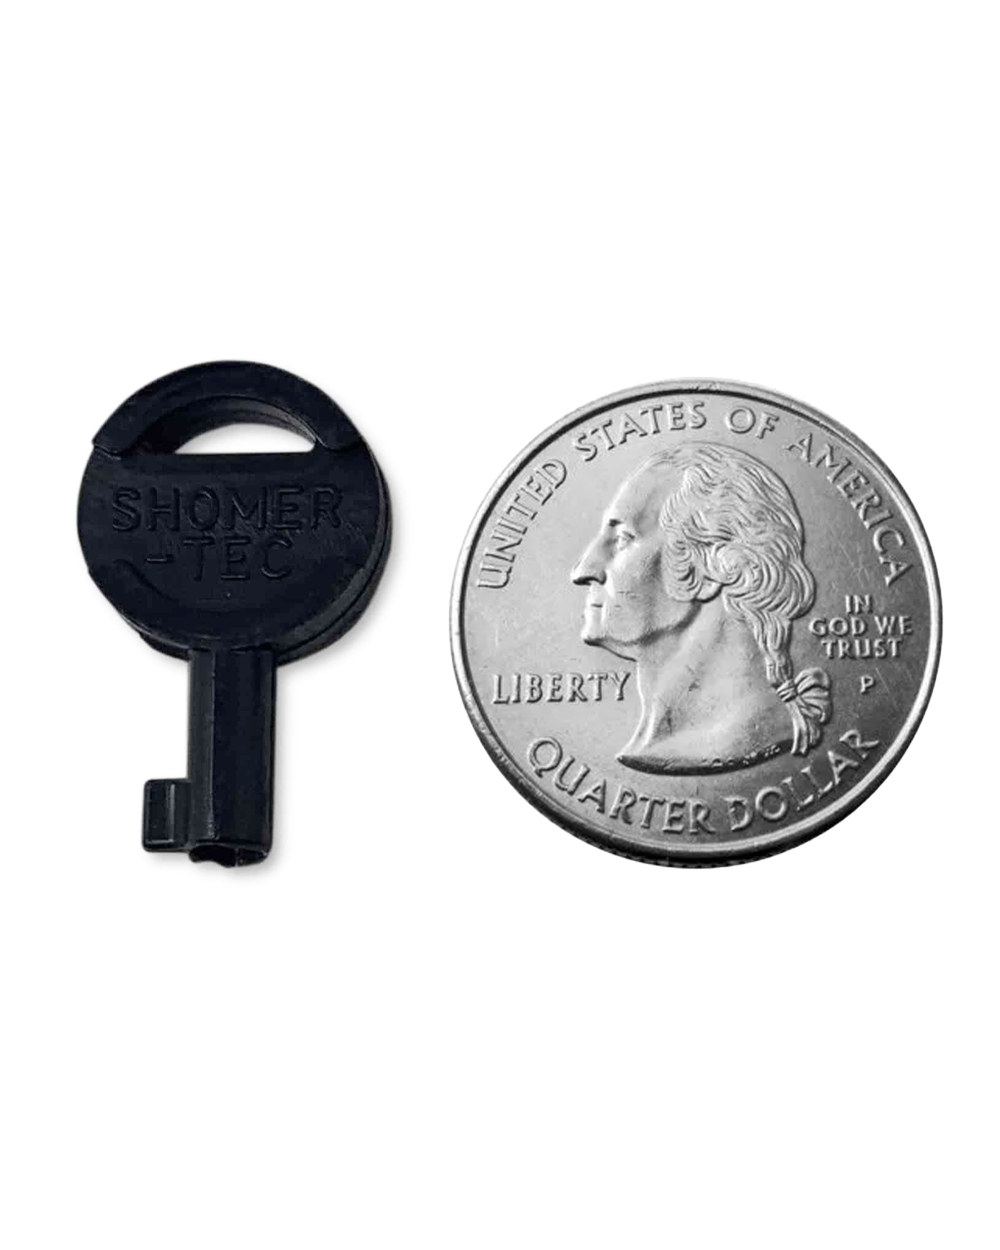 Universal Plastic Handcuff Key, Concealed & Covert